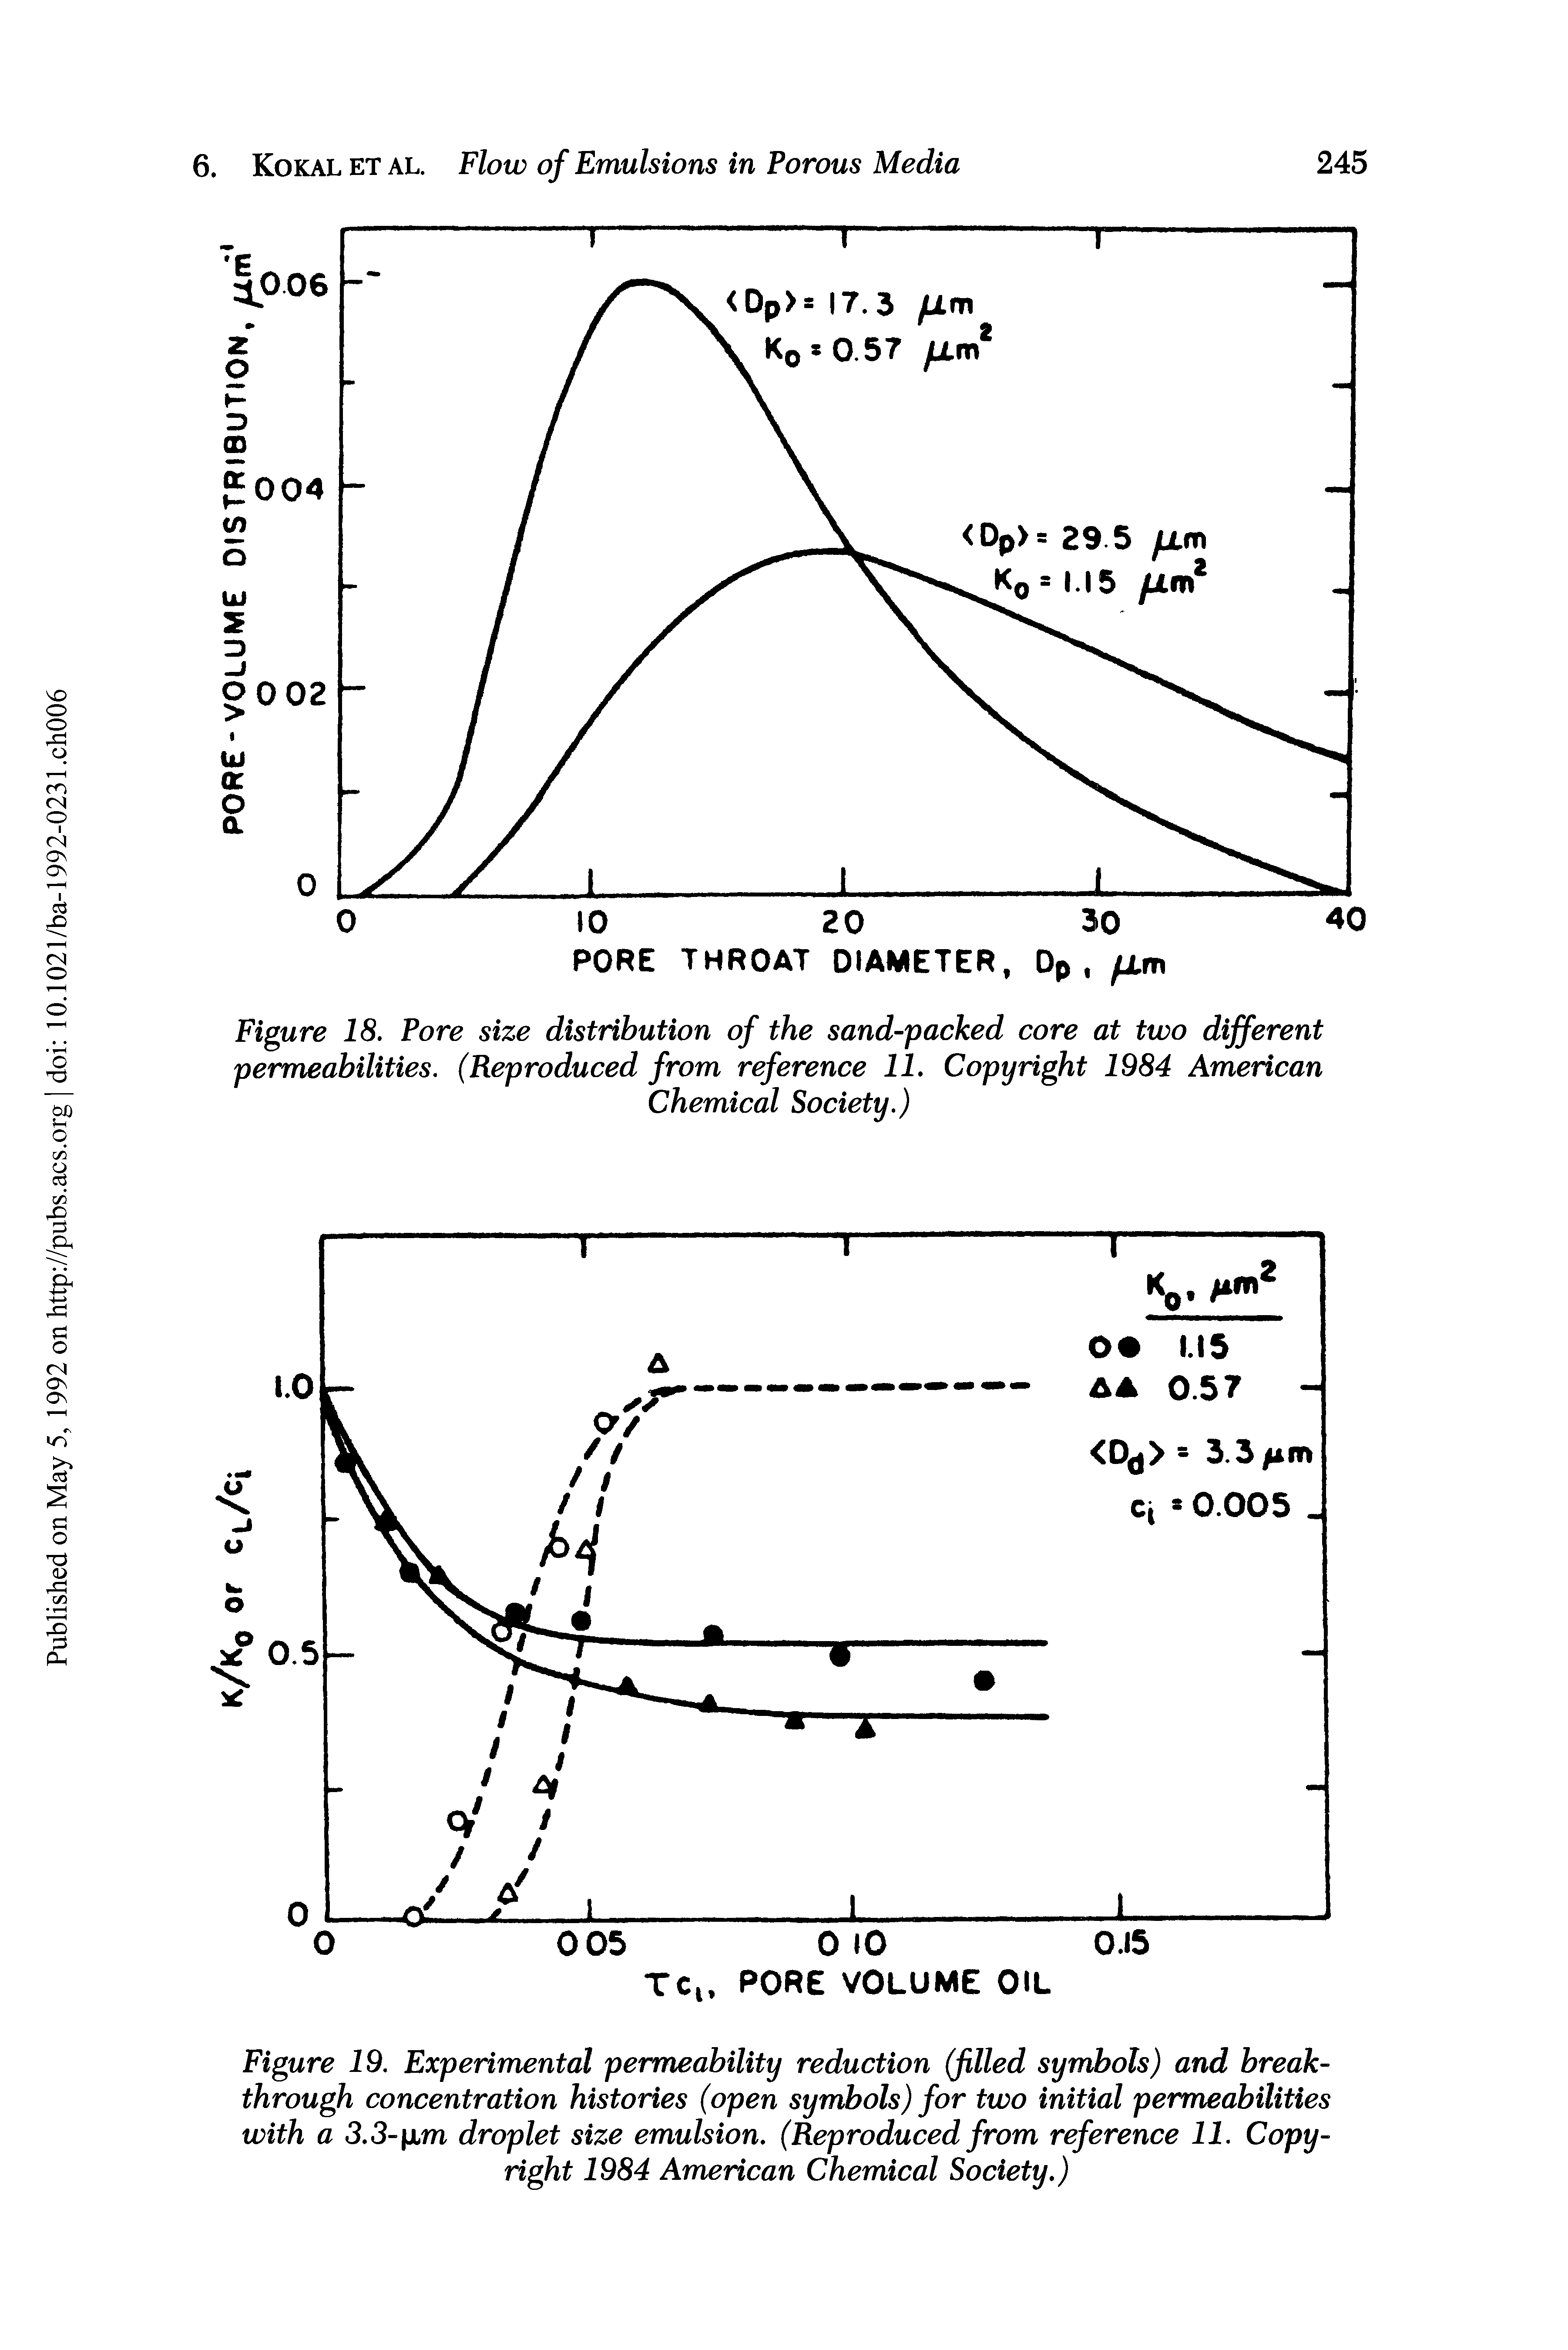 Figure 19. Experimental permeability reduction (filled symbols) and breakthrough concentration histories (open symbols) for two initial permeabilities with a 3.3- xm droplet size emulsion. (Reproduced from reference 11. Copyright 1984 American Chemical Society.)...